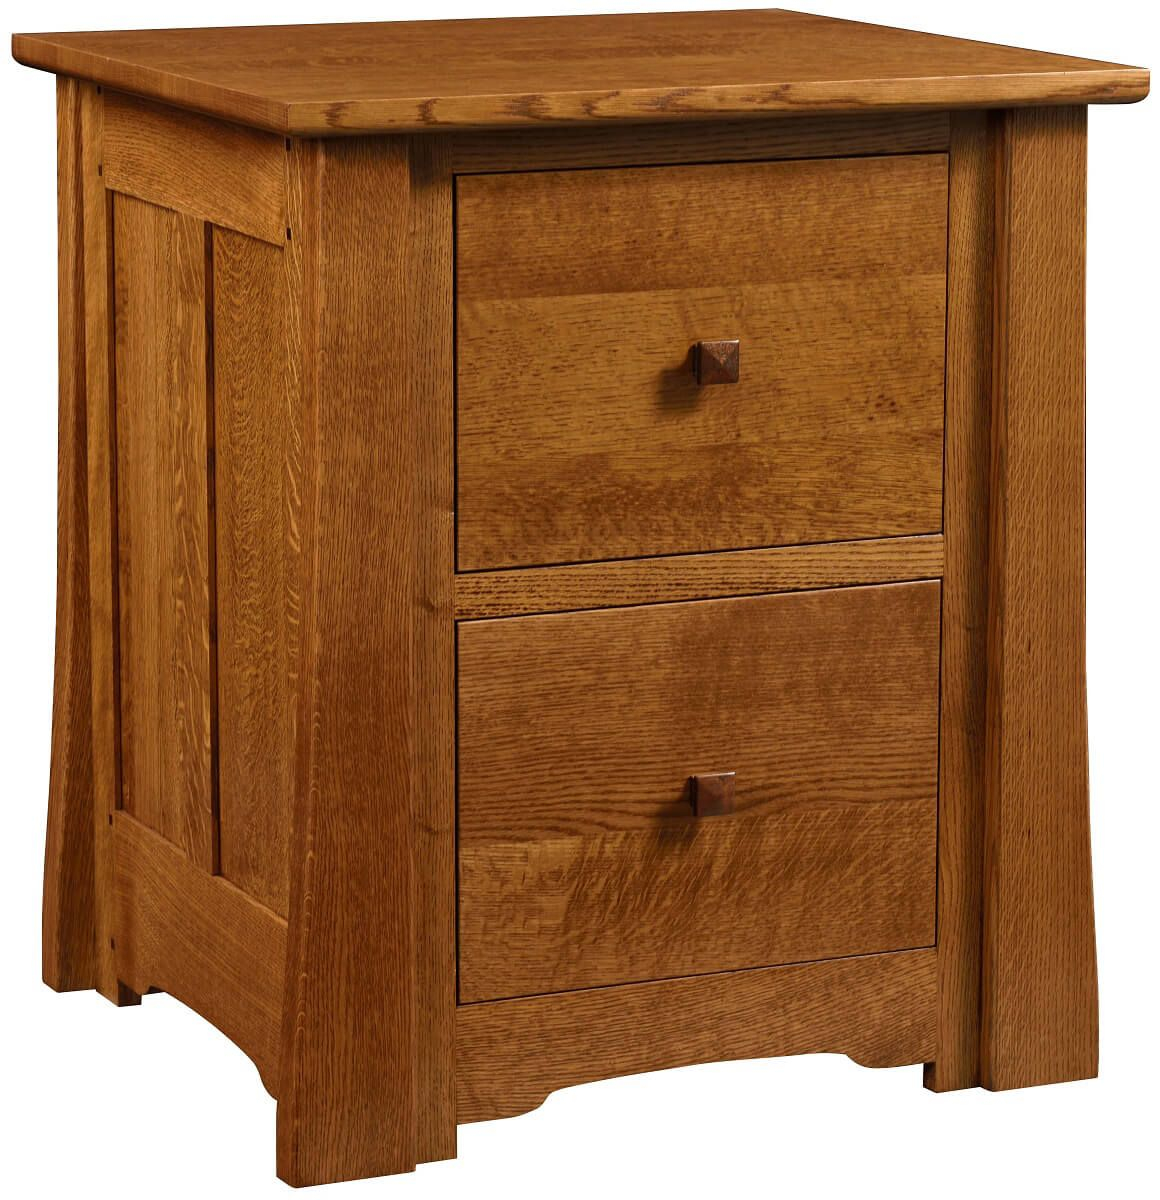 Dayton Craftsman Style File Cabinet Countryside Amish Furniture within dimensions 1160 X 1200